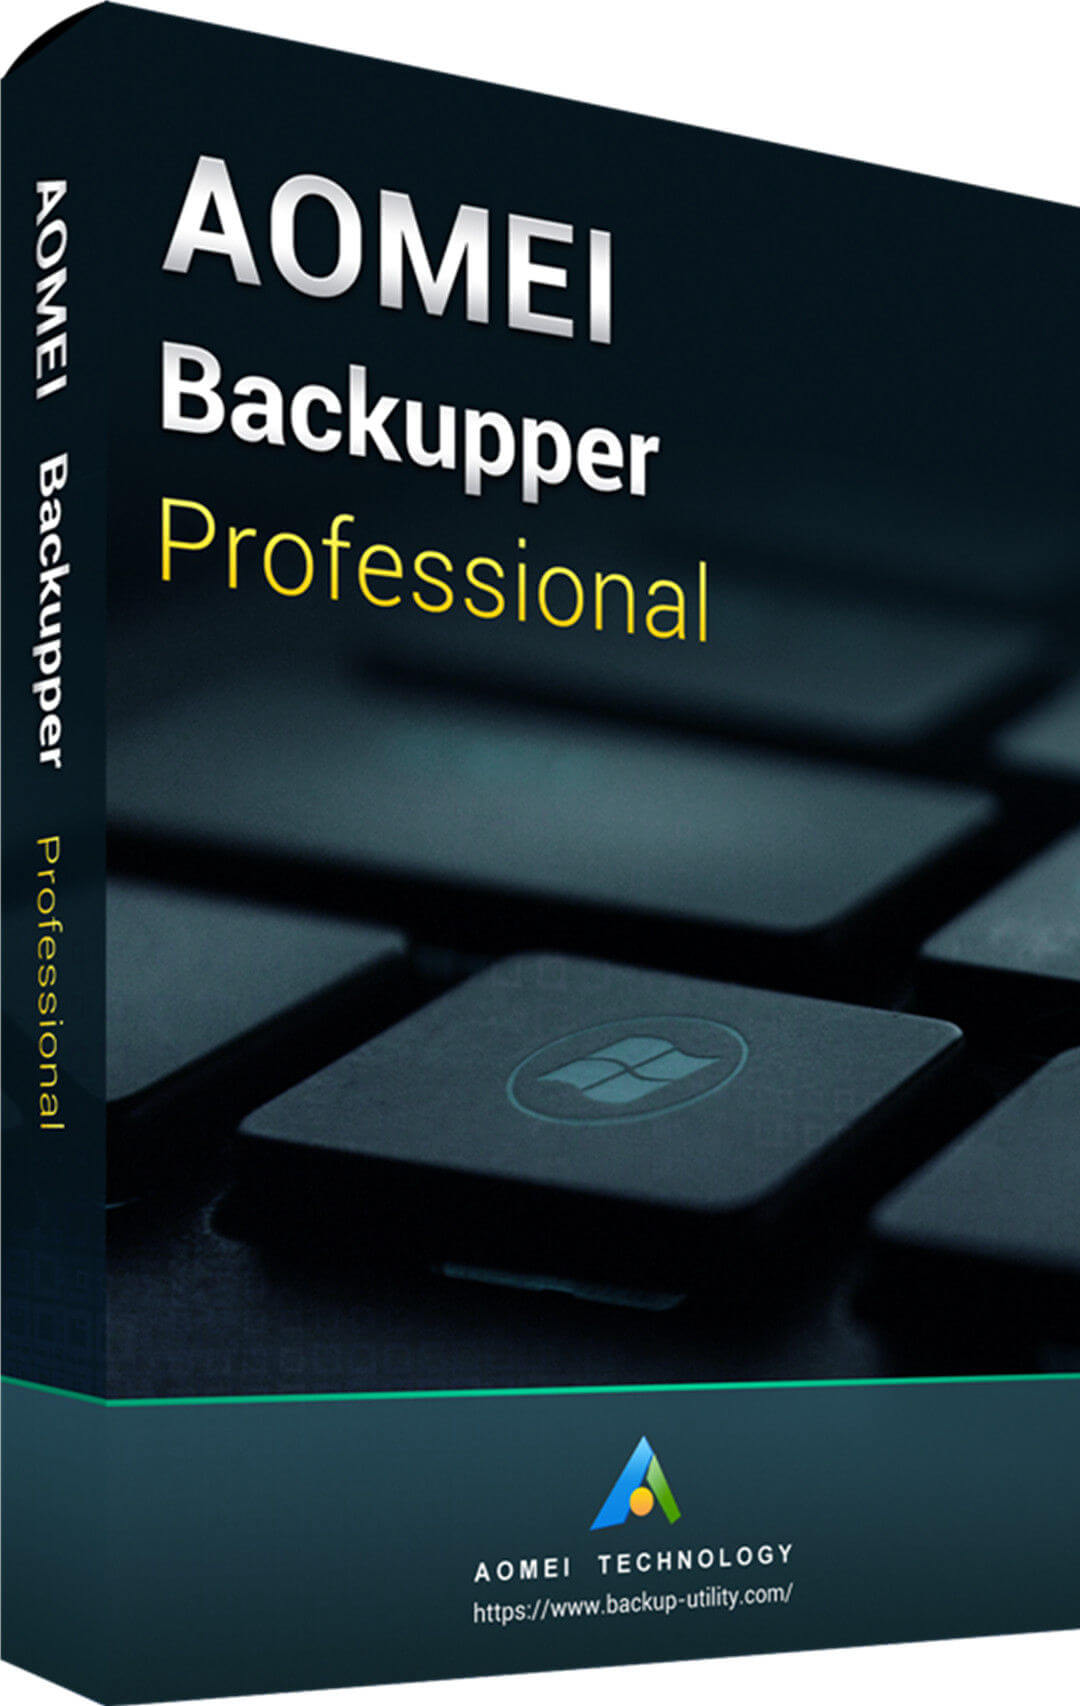 AOMEI Backupper Professional 7.3.0 for windows download free